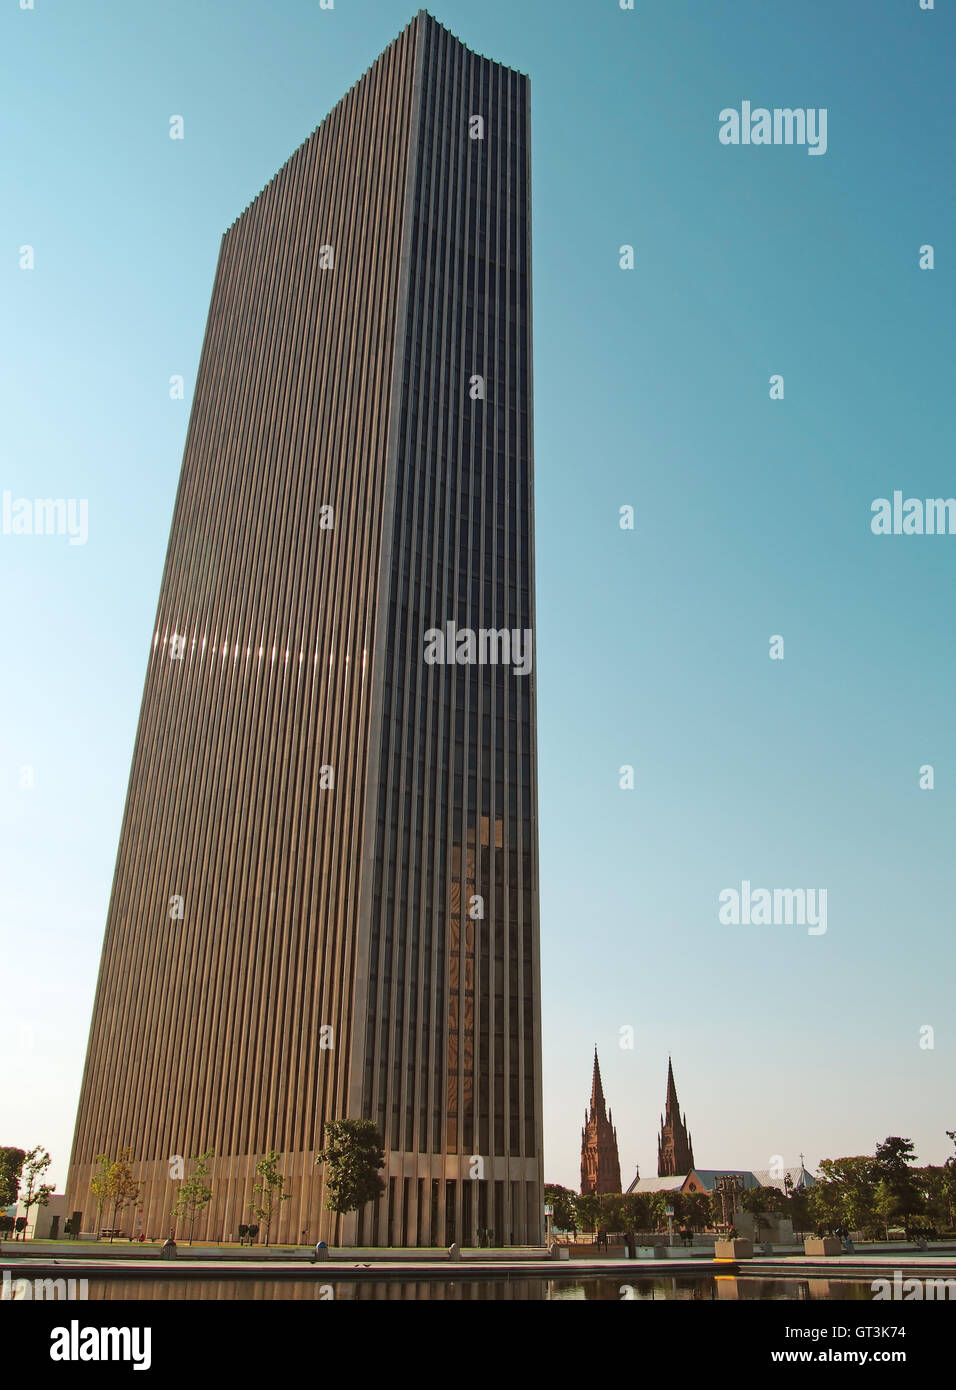 Albany, New York, USA. Septembre, 4,2016. Erastus Corning II Tower , Empire State Plaza, Albany, New York Banque D'Images